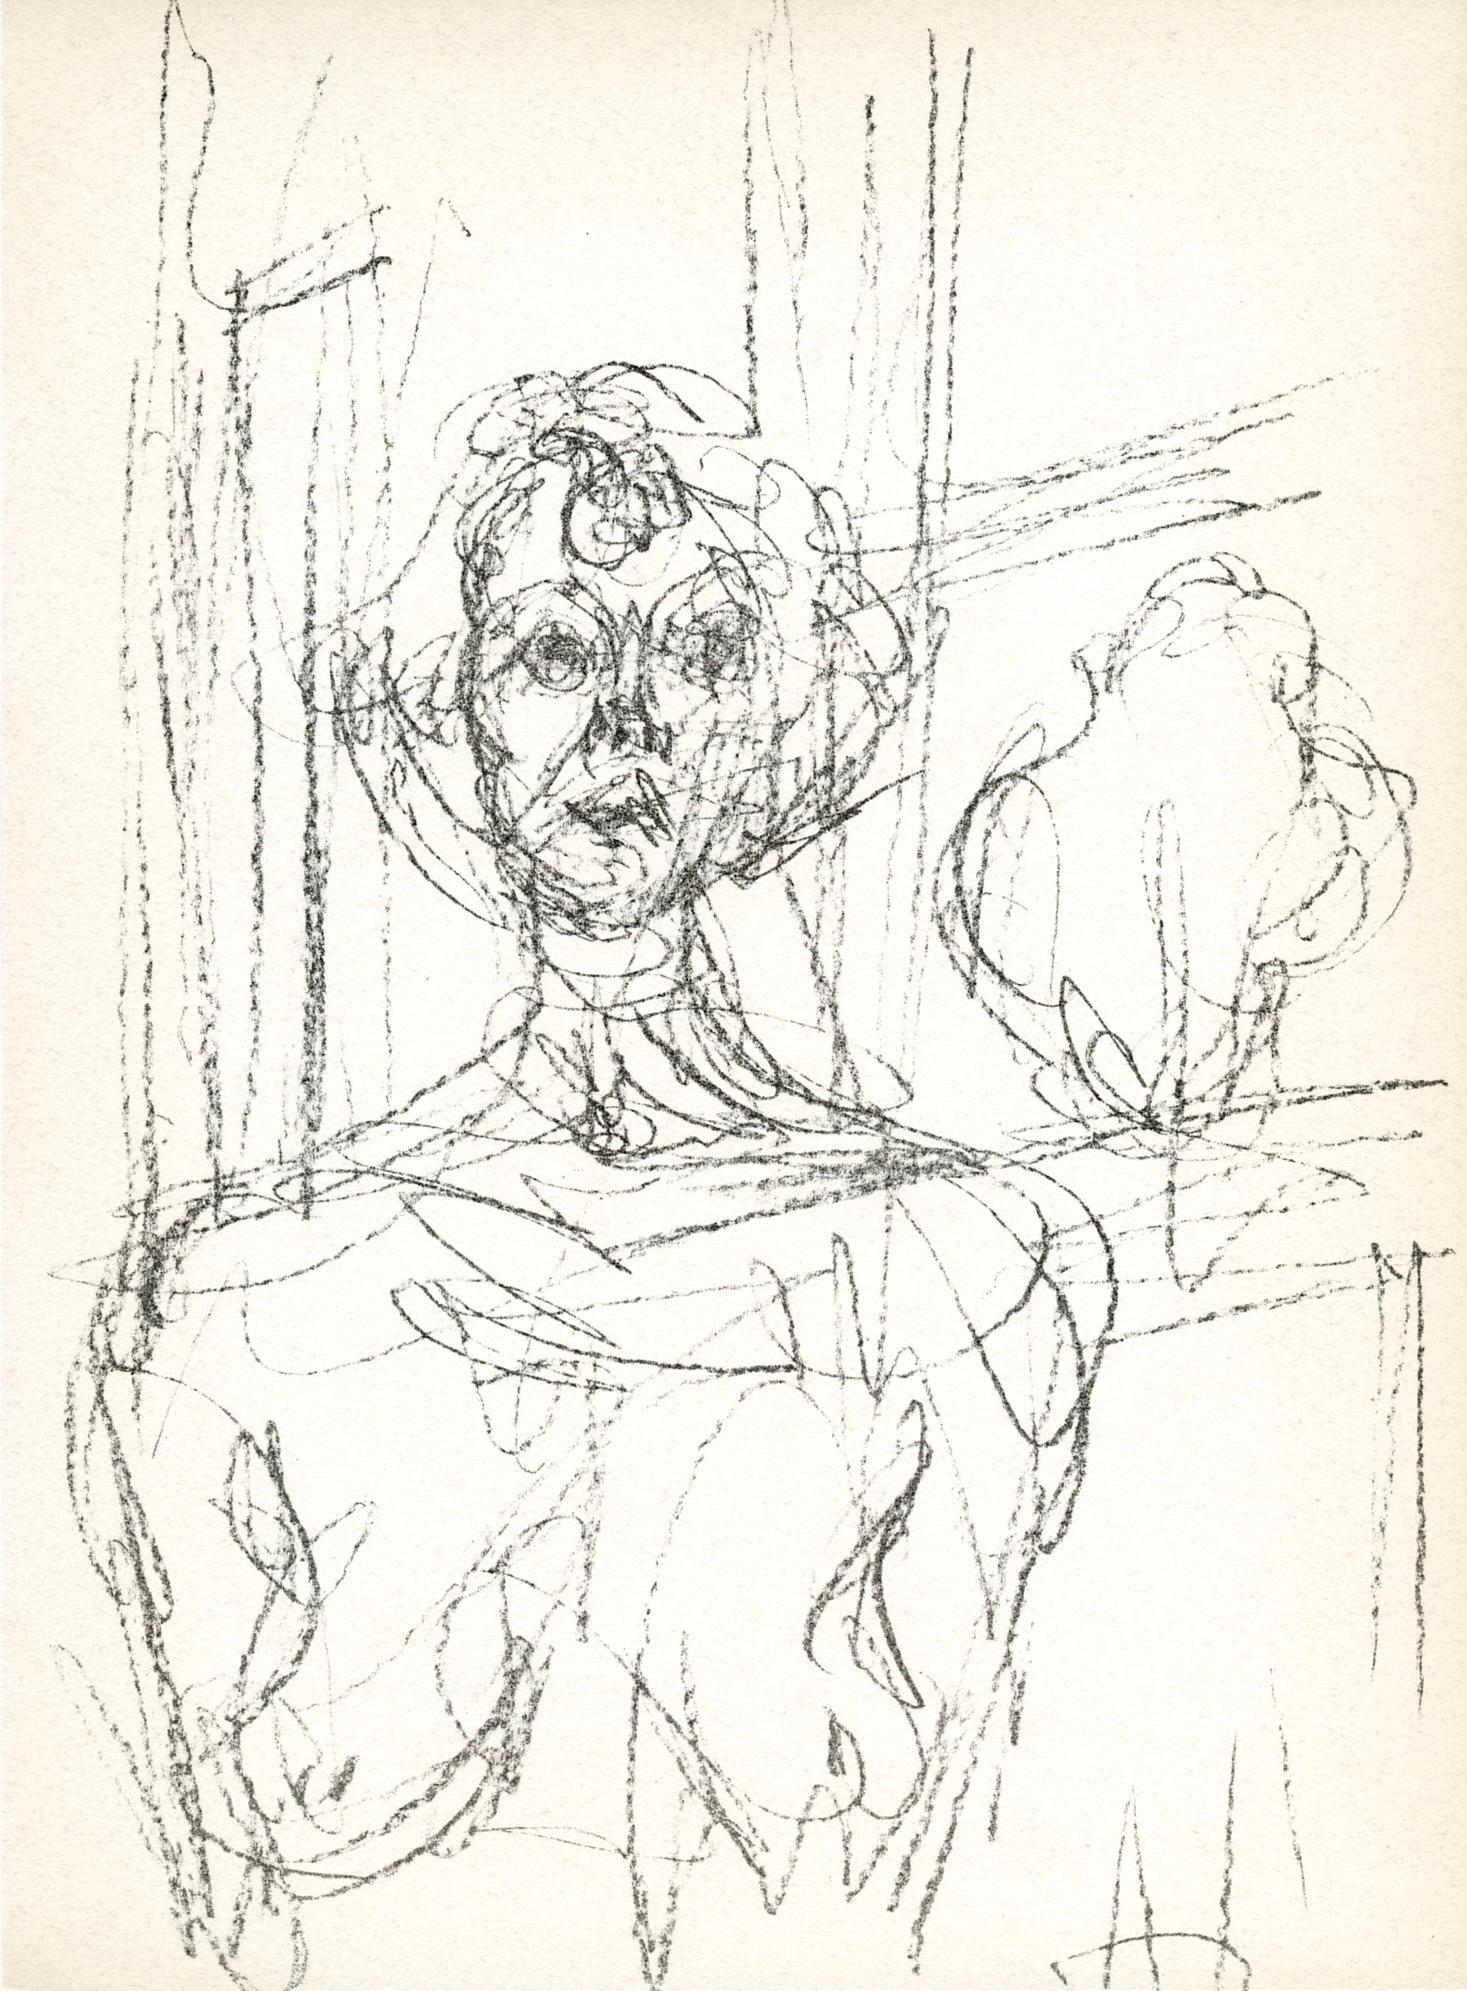 Giacometti, Annette, Prints from the Mourlot Press (after)